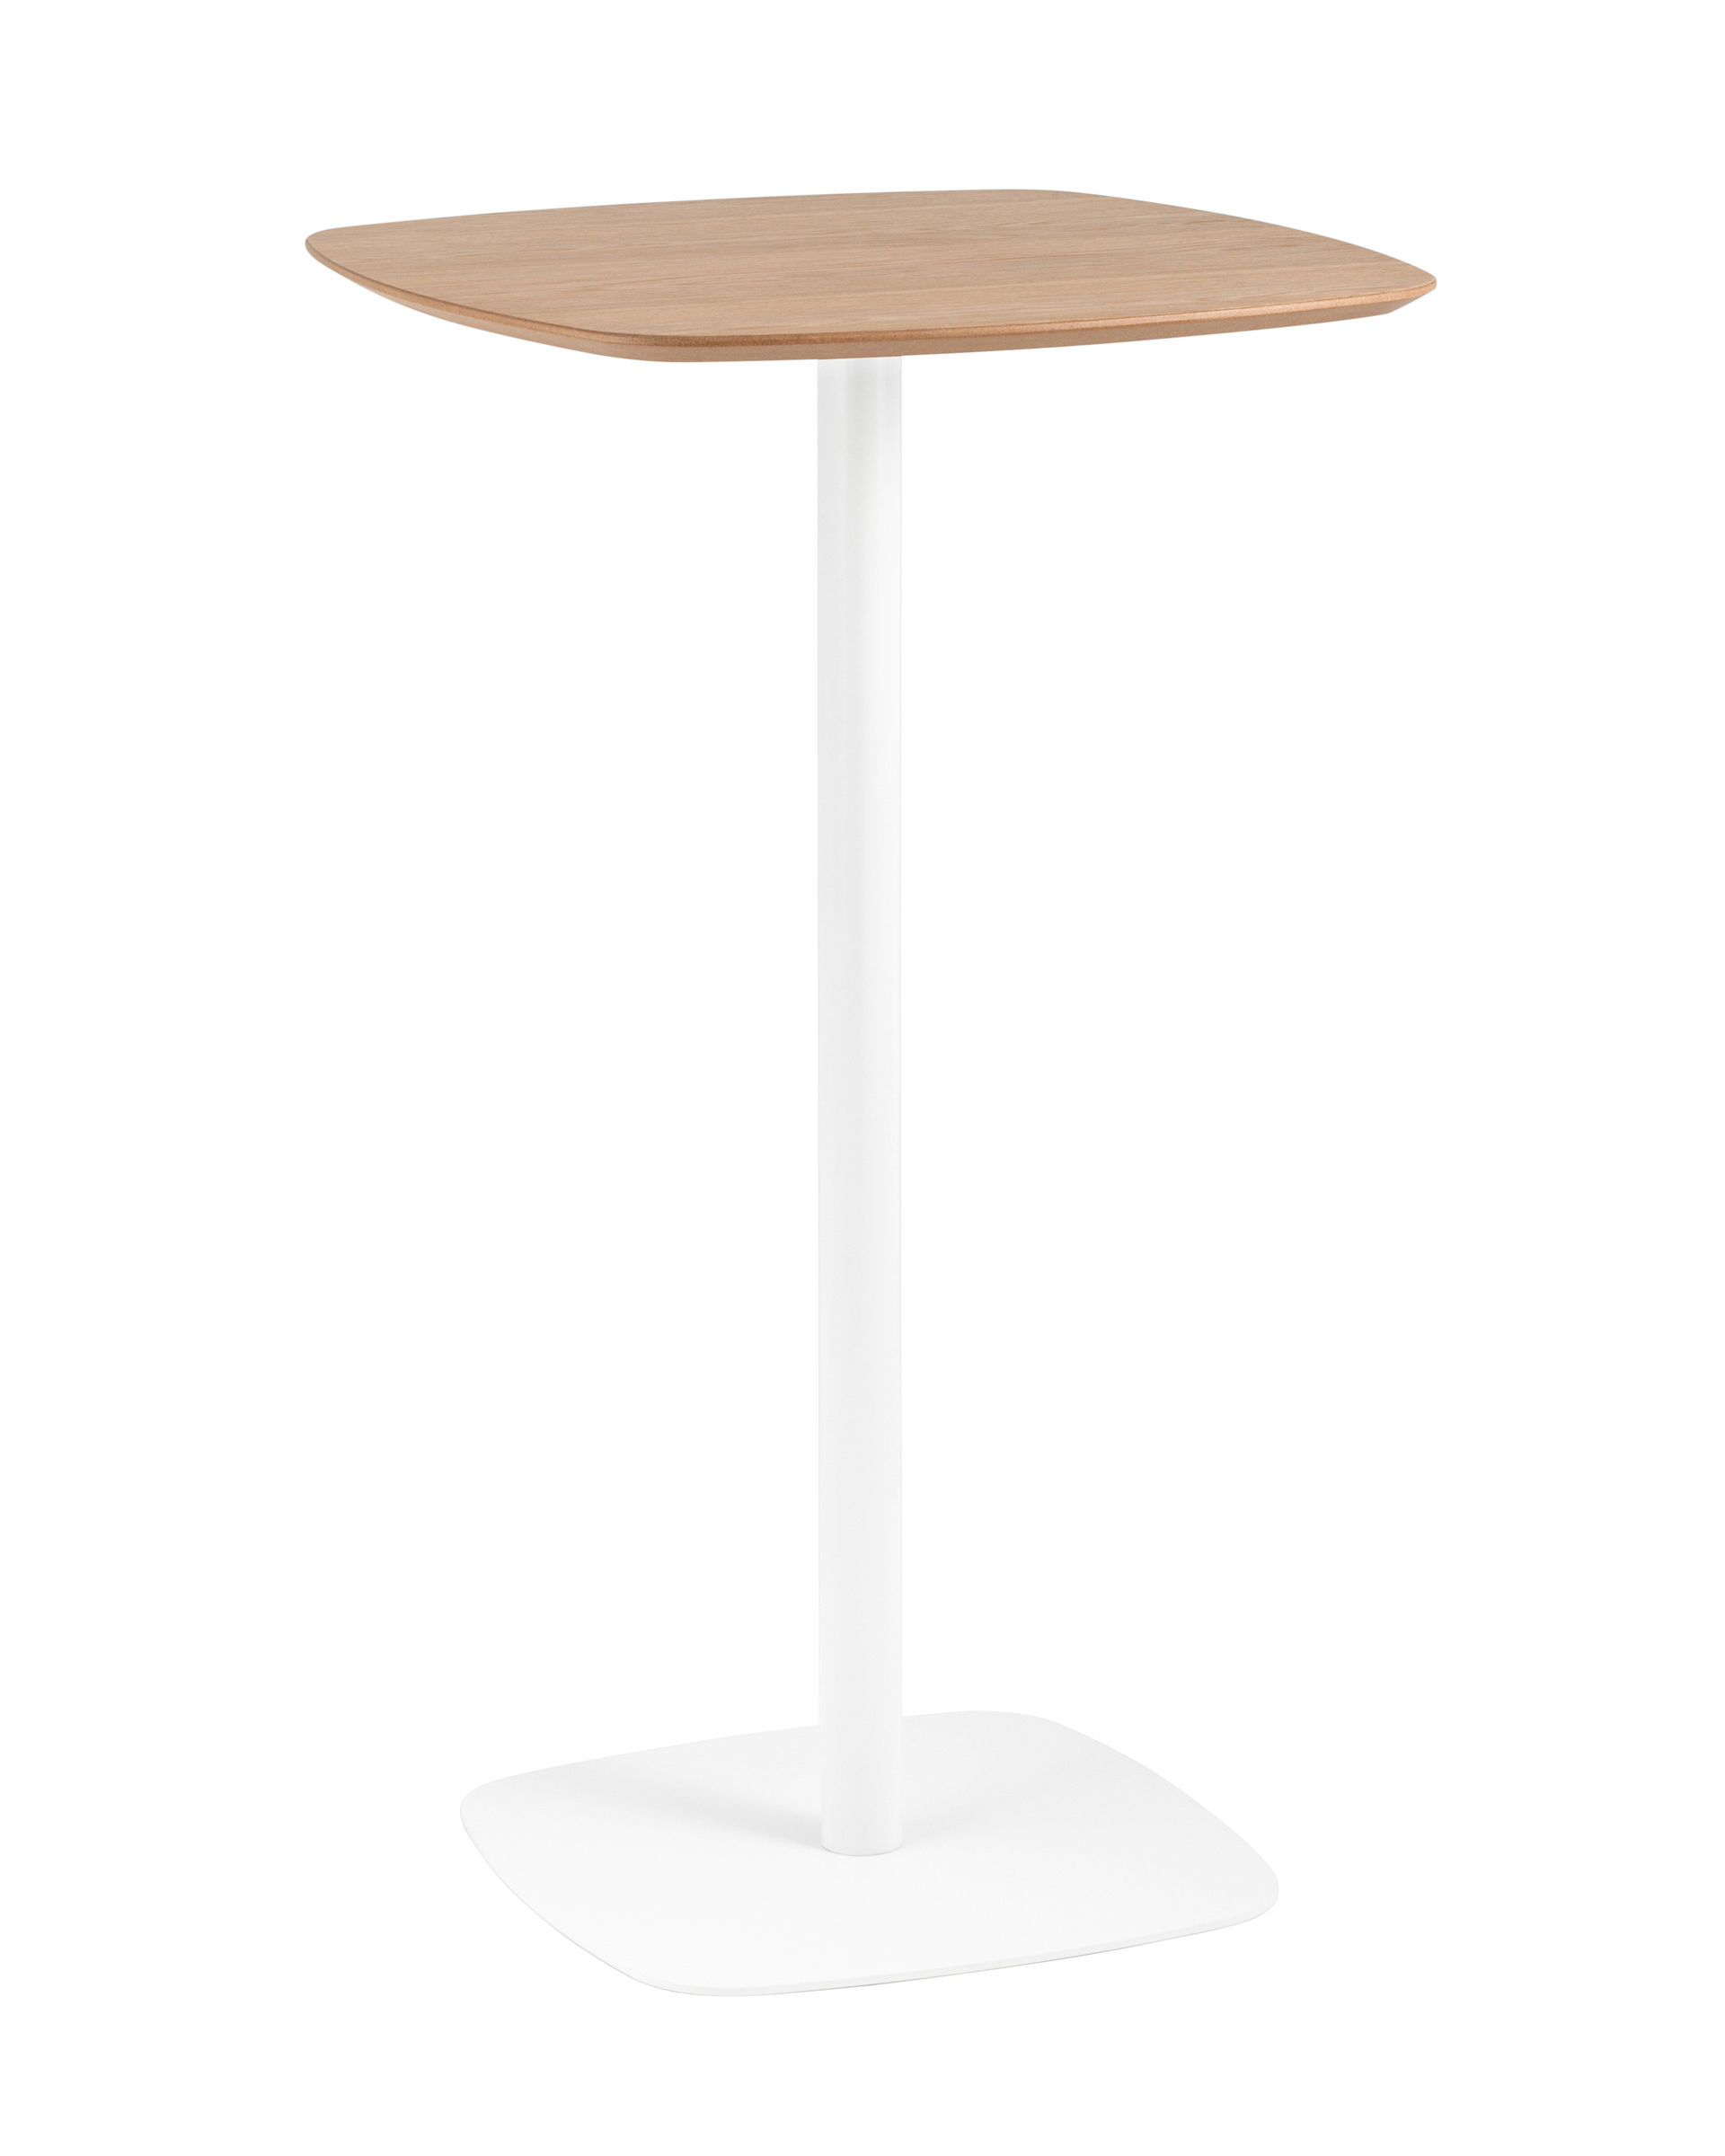   Stool Group Form 000036019